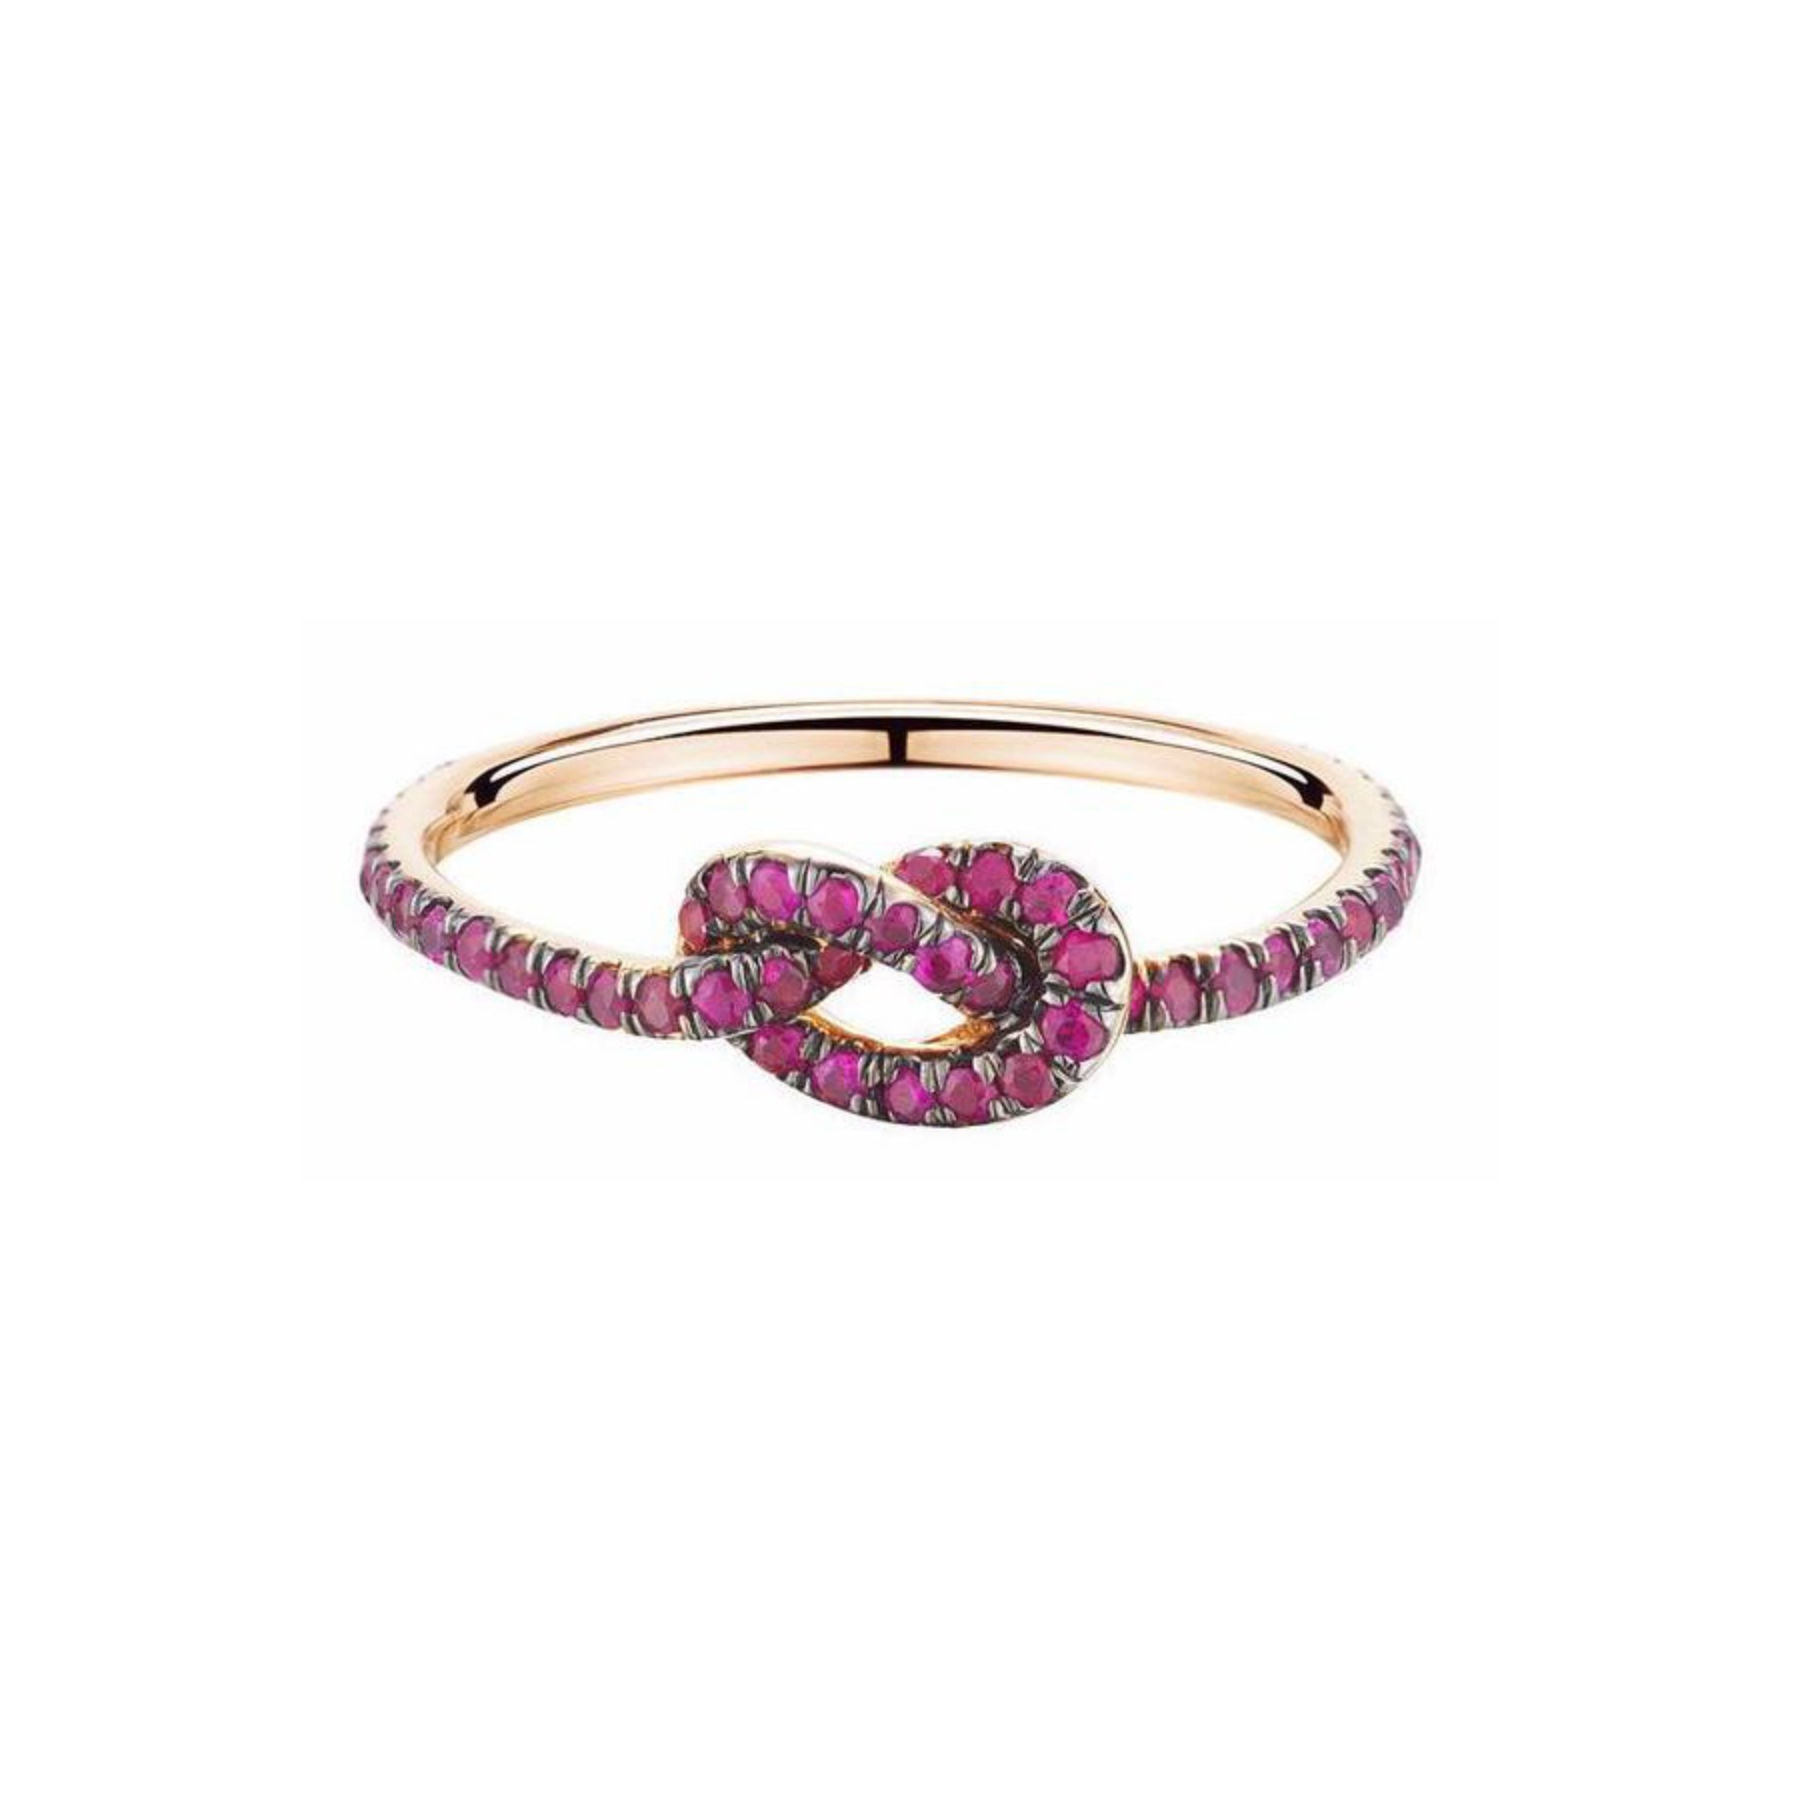 RUBY LOVE KNOT RING